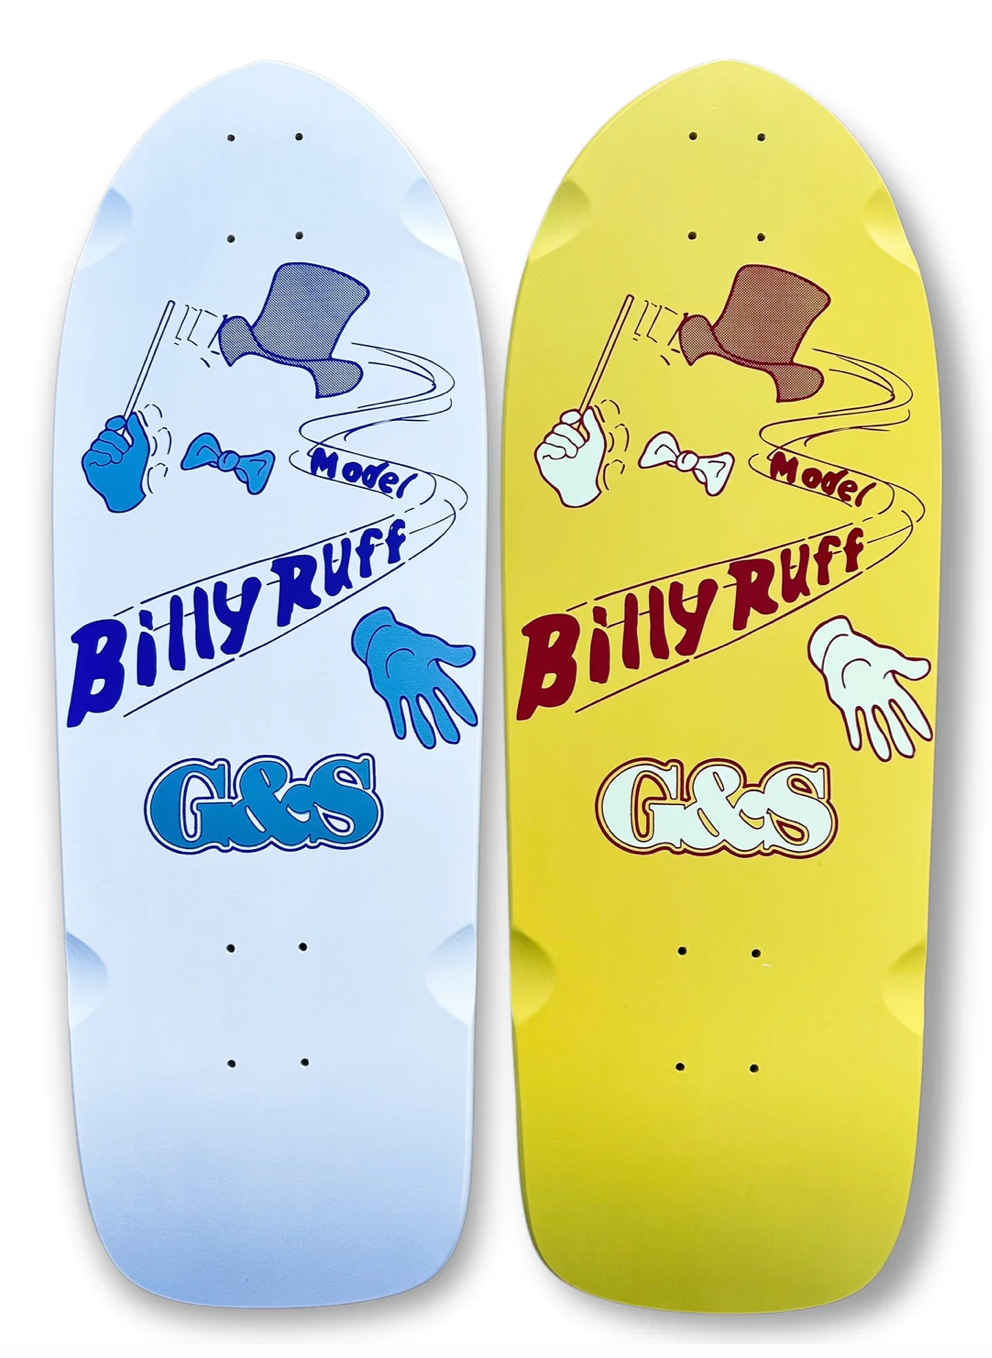 G&S Billy Ruff "Invisible Magician" - White Reissue Skateboard Deck